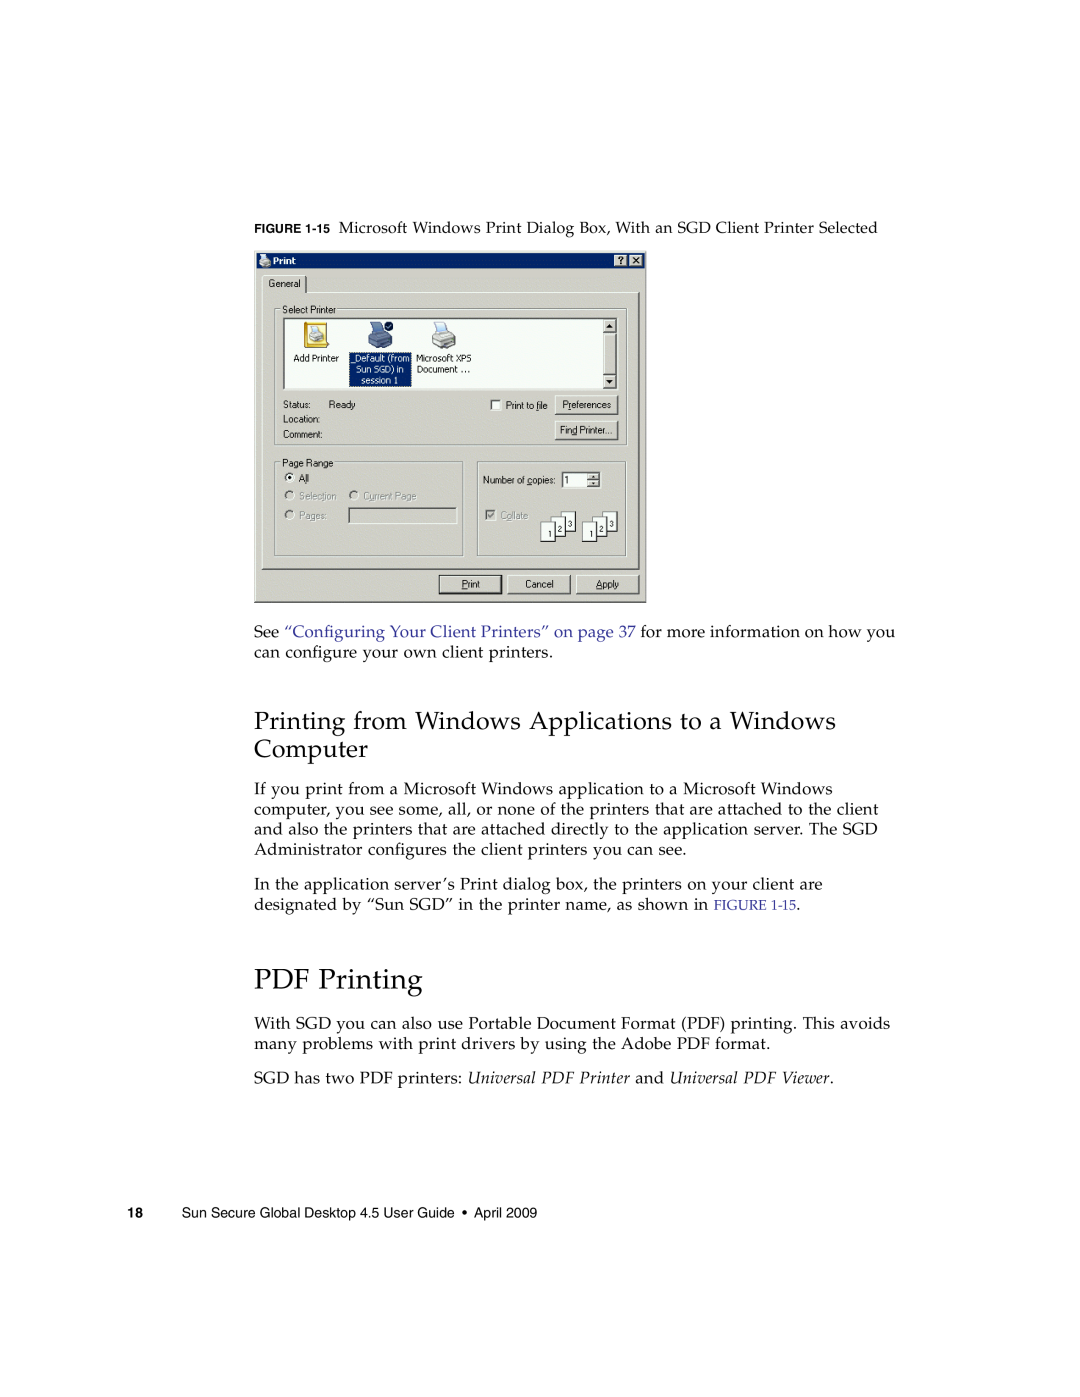 Sun Microsystems 4.5 manual Printing from Windows Applications to a Windows Computer 